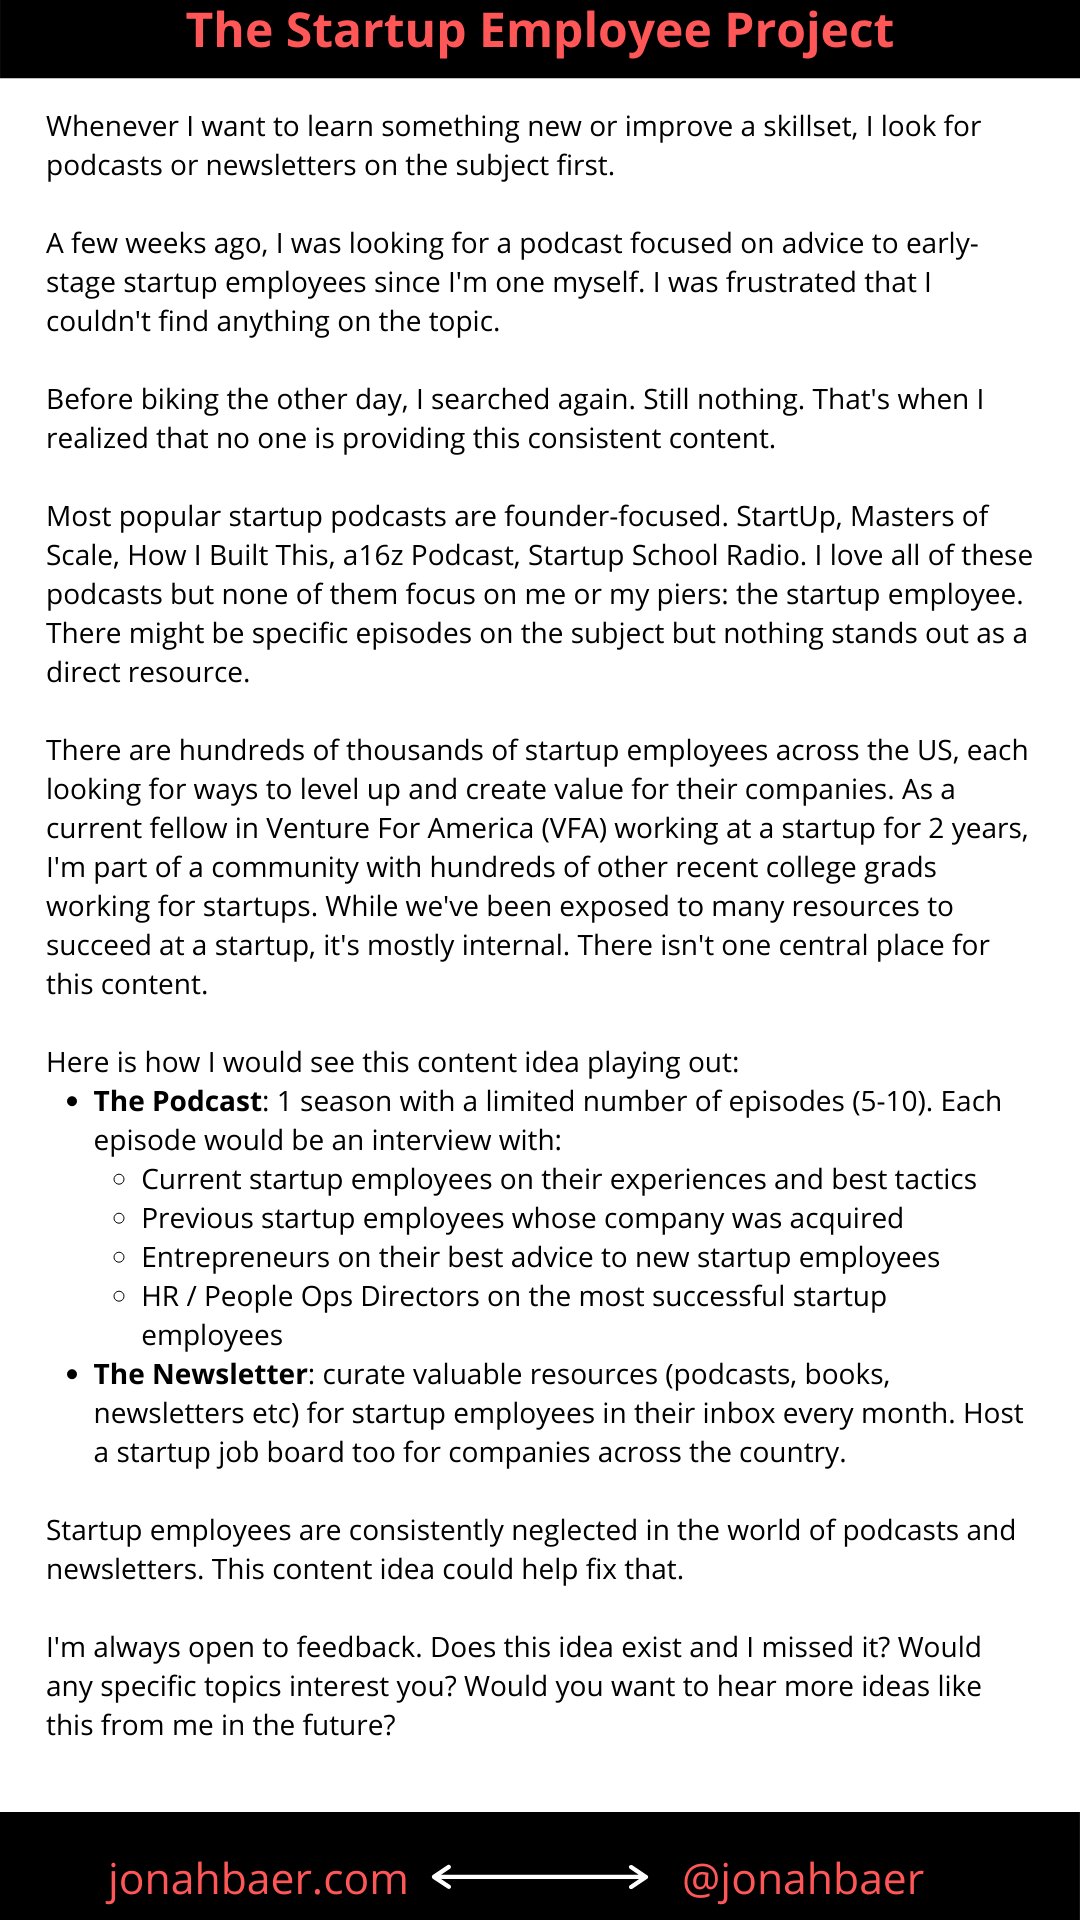 Podcast idea focused on the startup EMPLOYEE